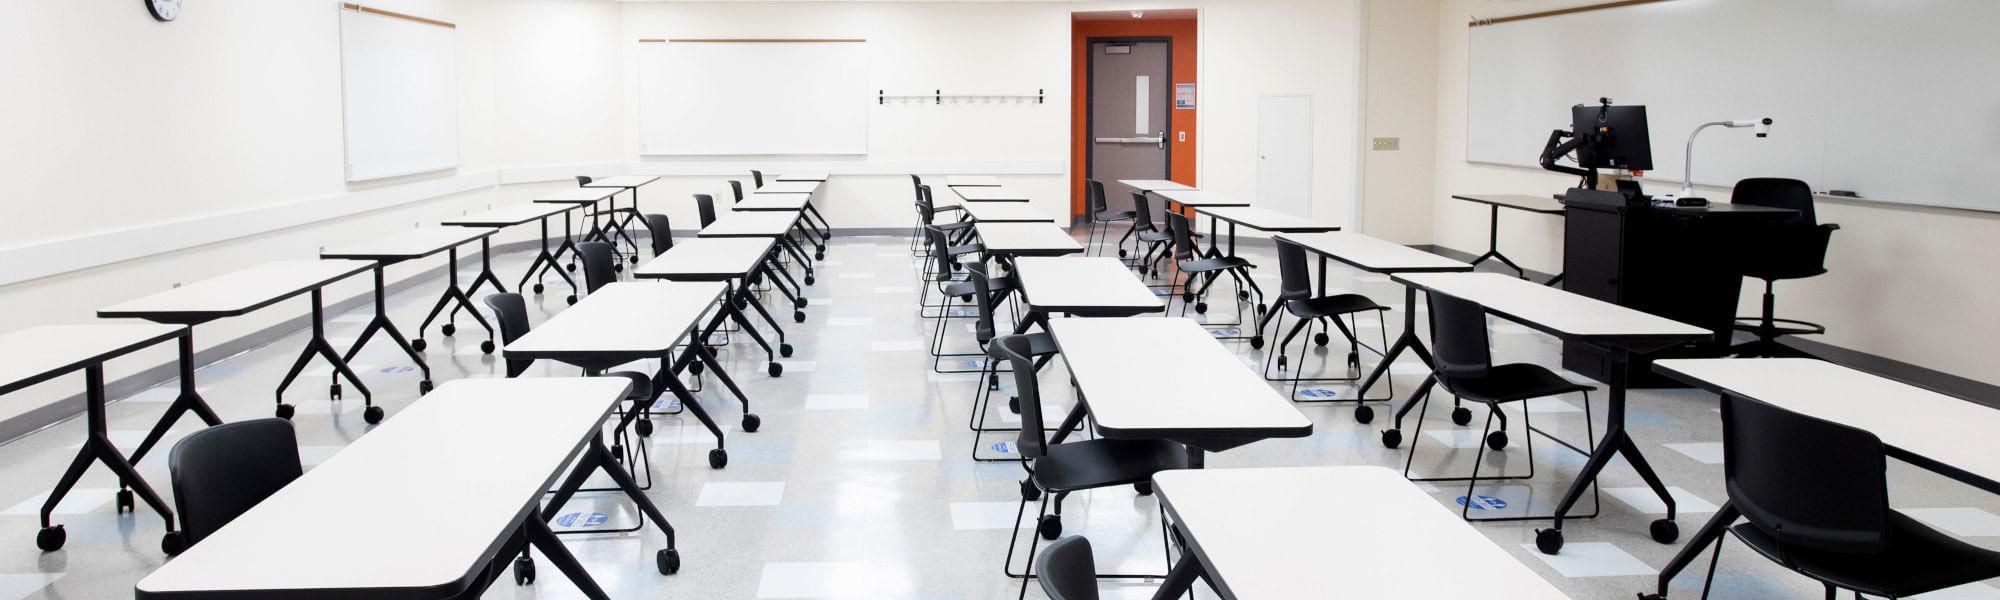 Photograph of a classroom with rows of tables and chairs.